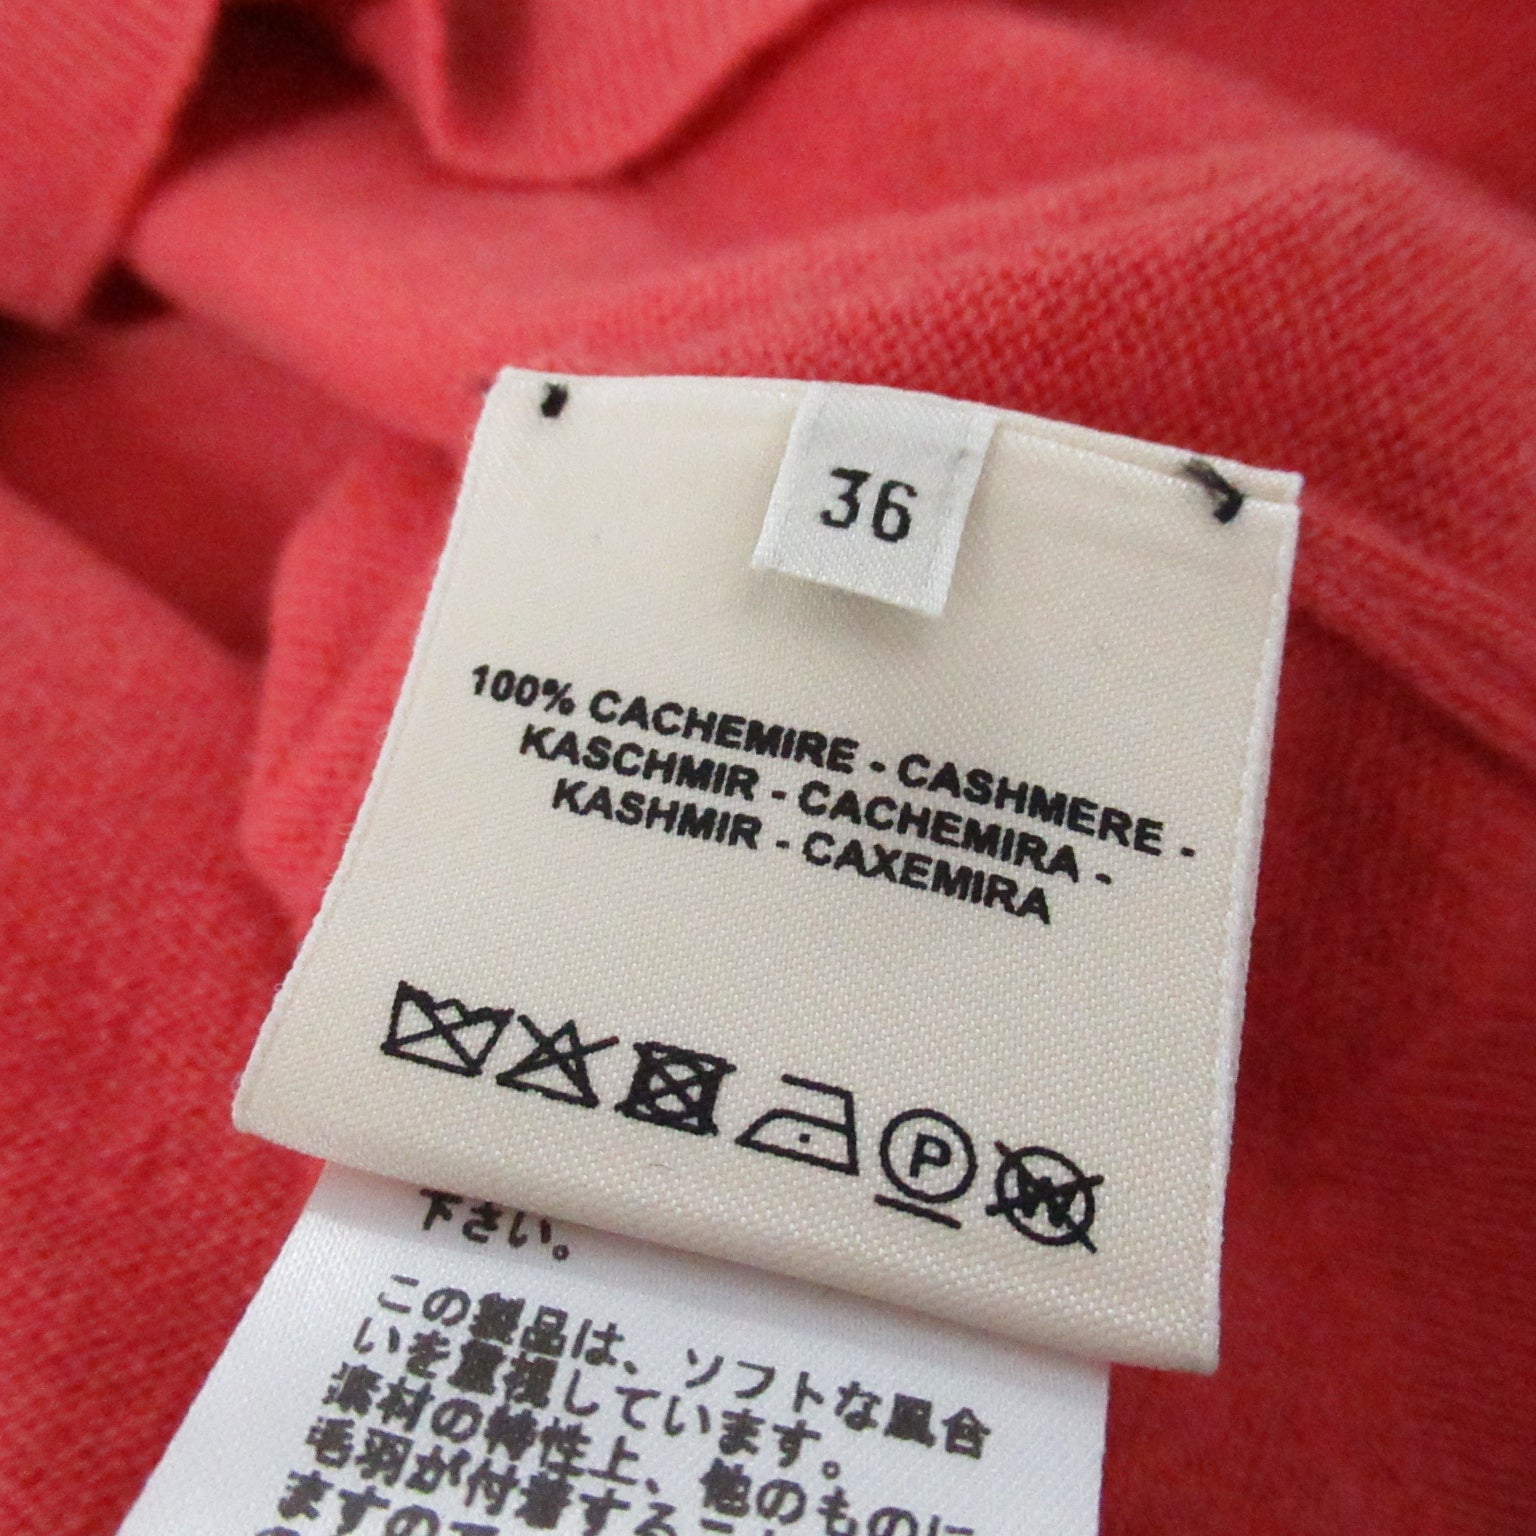 Hermes Hermes Cardigan  Tops Cashmere  Pink Collection